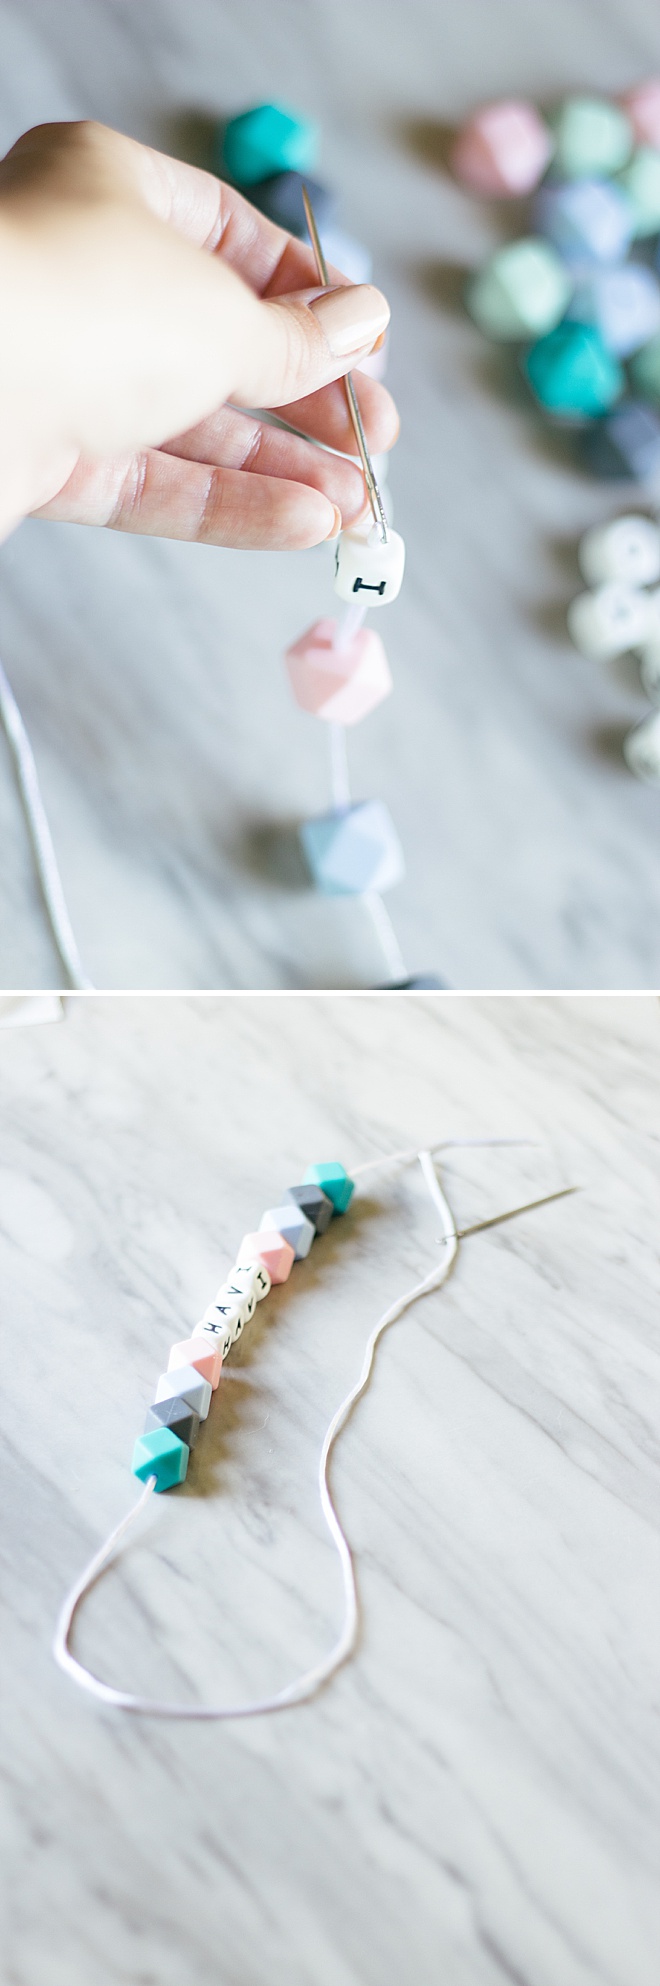 Personalizing for your baby is so much fun! Today I am walking you through how to make a personalized teething pacifier clip.